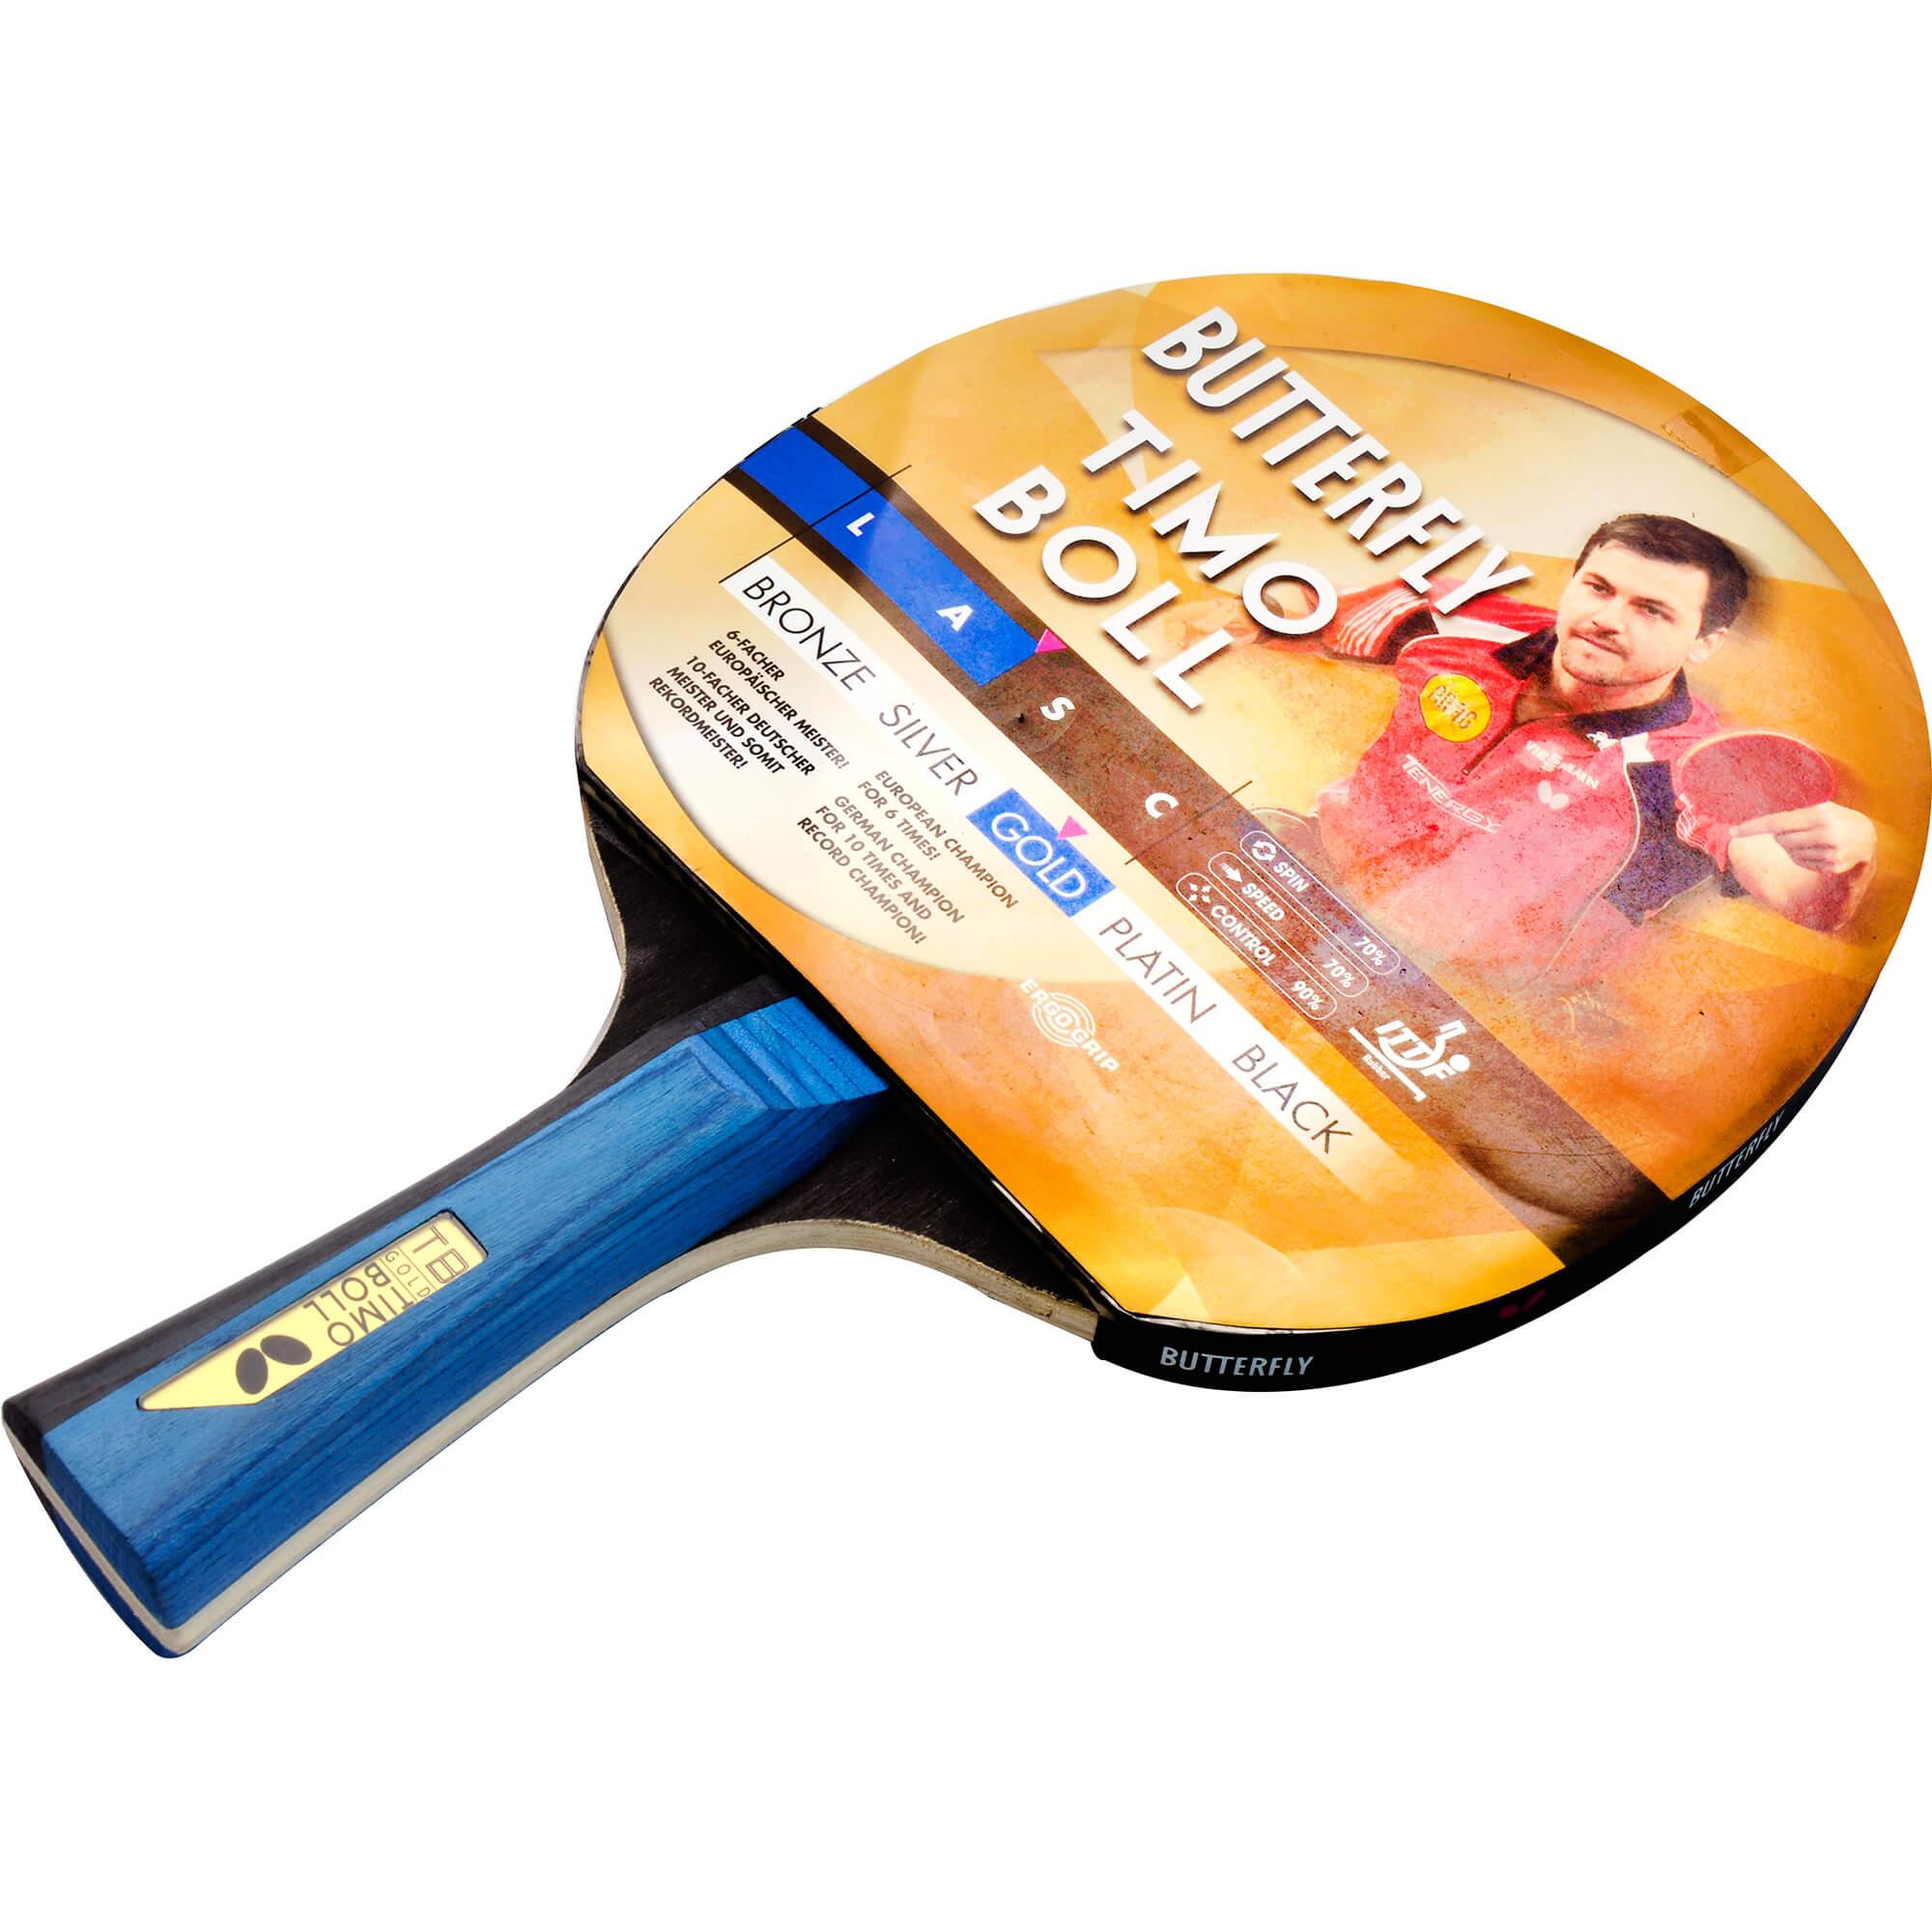 Butterfly Timo Boll Gold Table Tennis Bat ITTF Approved 1.5 mm Pan Asia Rubber